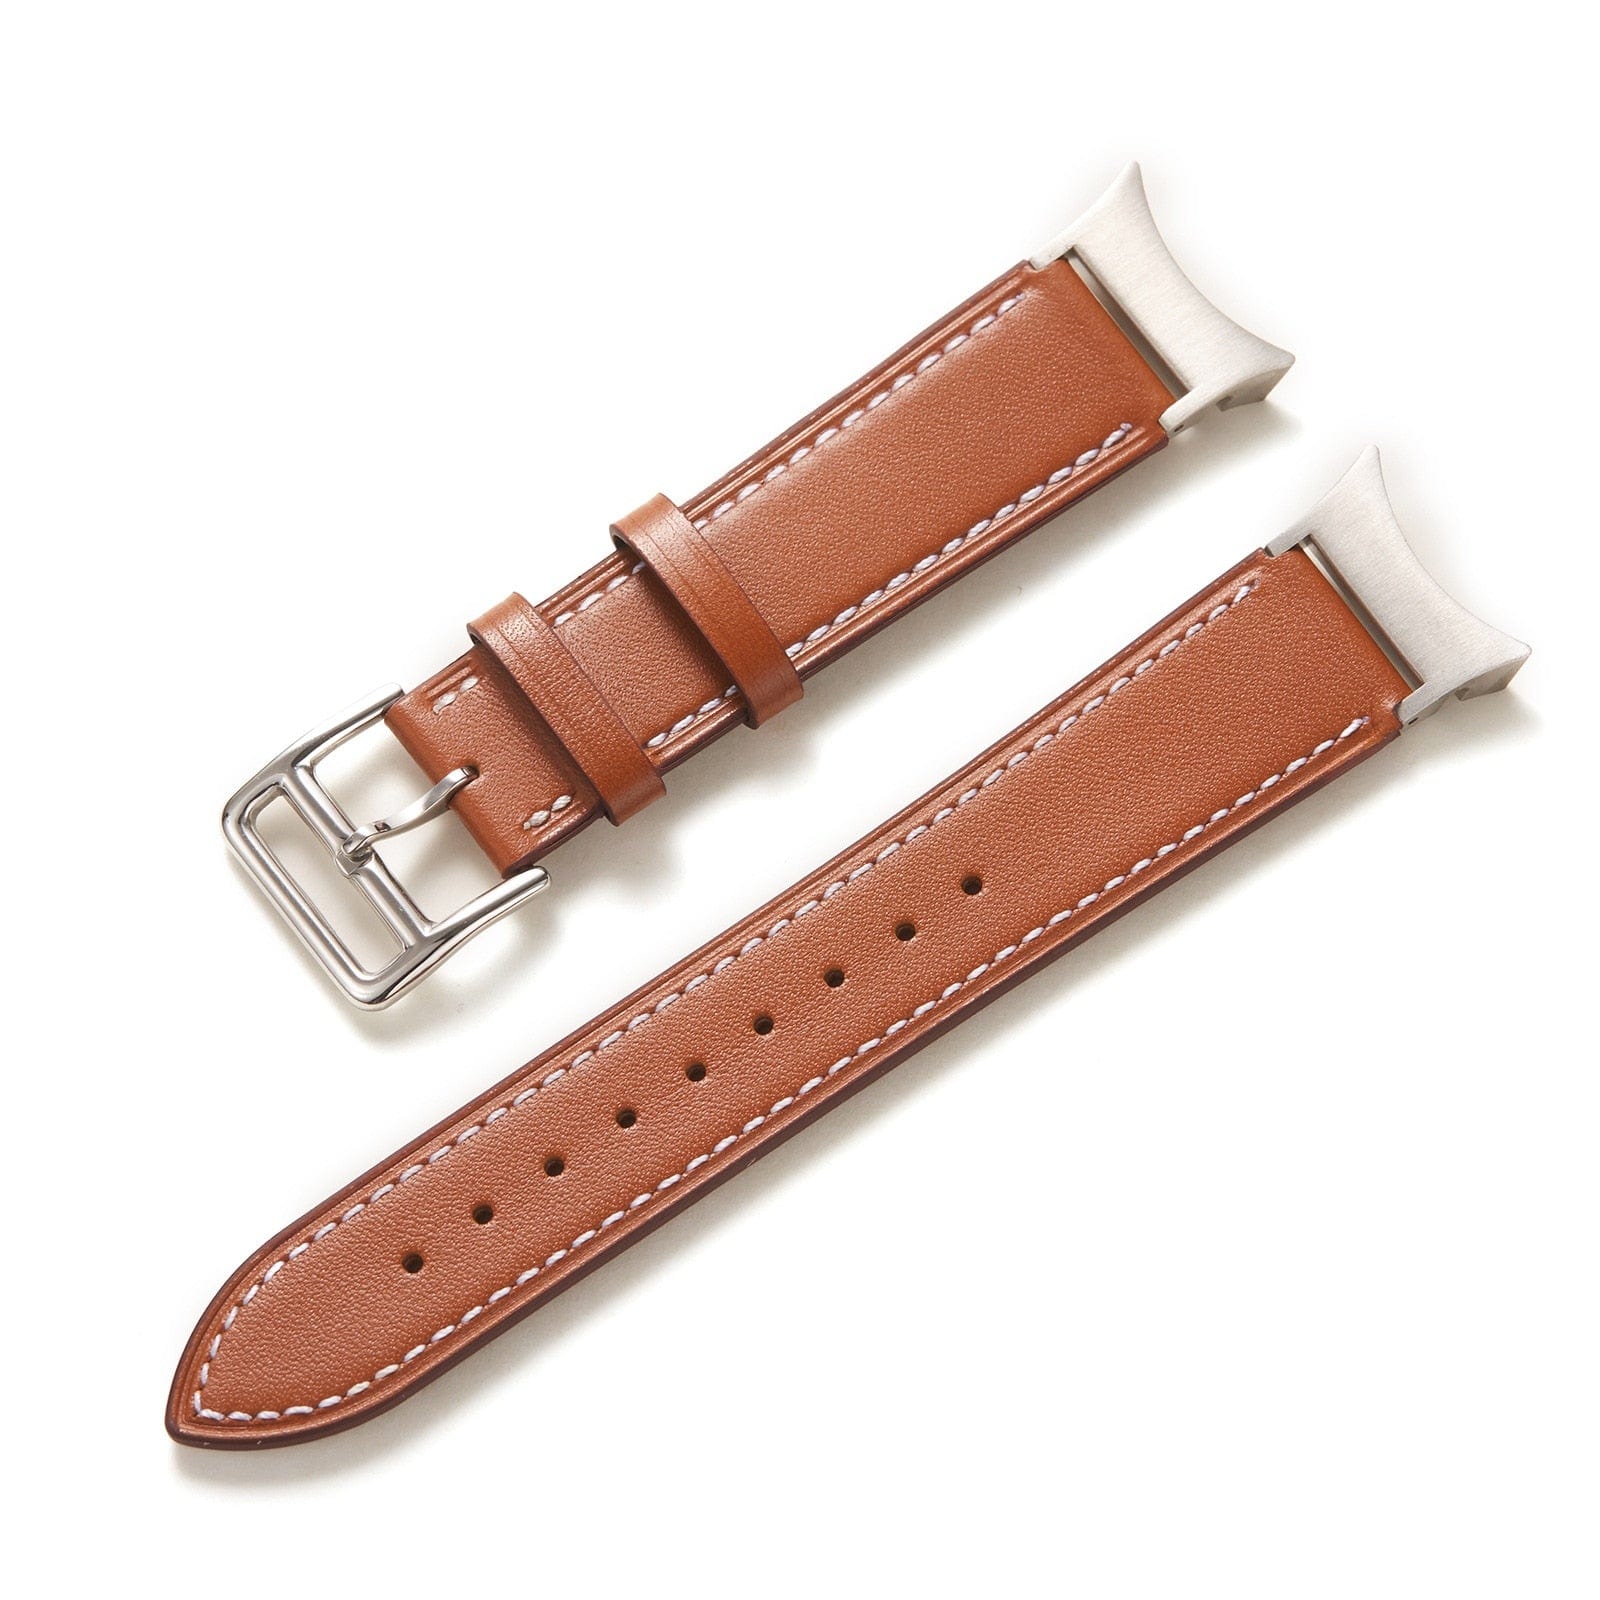 VVS Jewelry hip hop jewelry Two-Tone Leather Watch Strap for Smart Watches